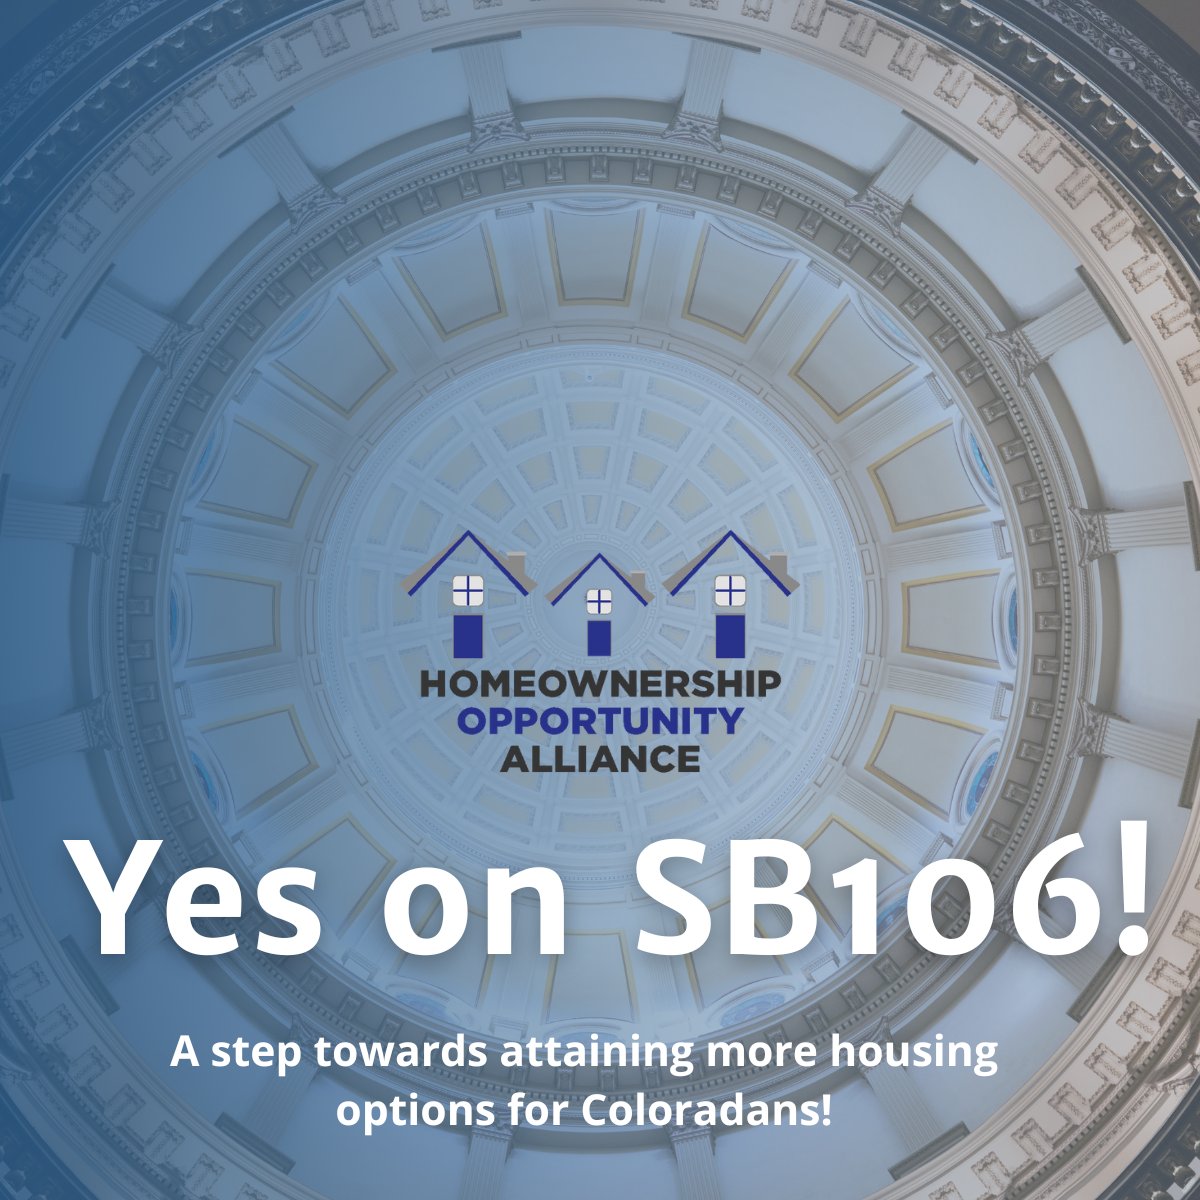 SB106 is a step in the right direction towards providing more affordable & attainable housing options for our state. Thank you, Senators, for supporting our efforts to reform construction liability litigation #copolitics. 

#HousingAffordability #ColoradoHousing